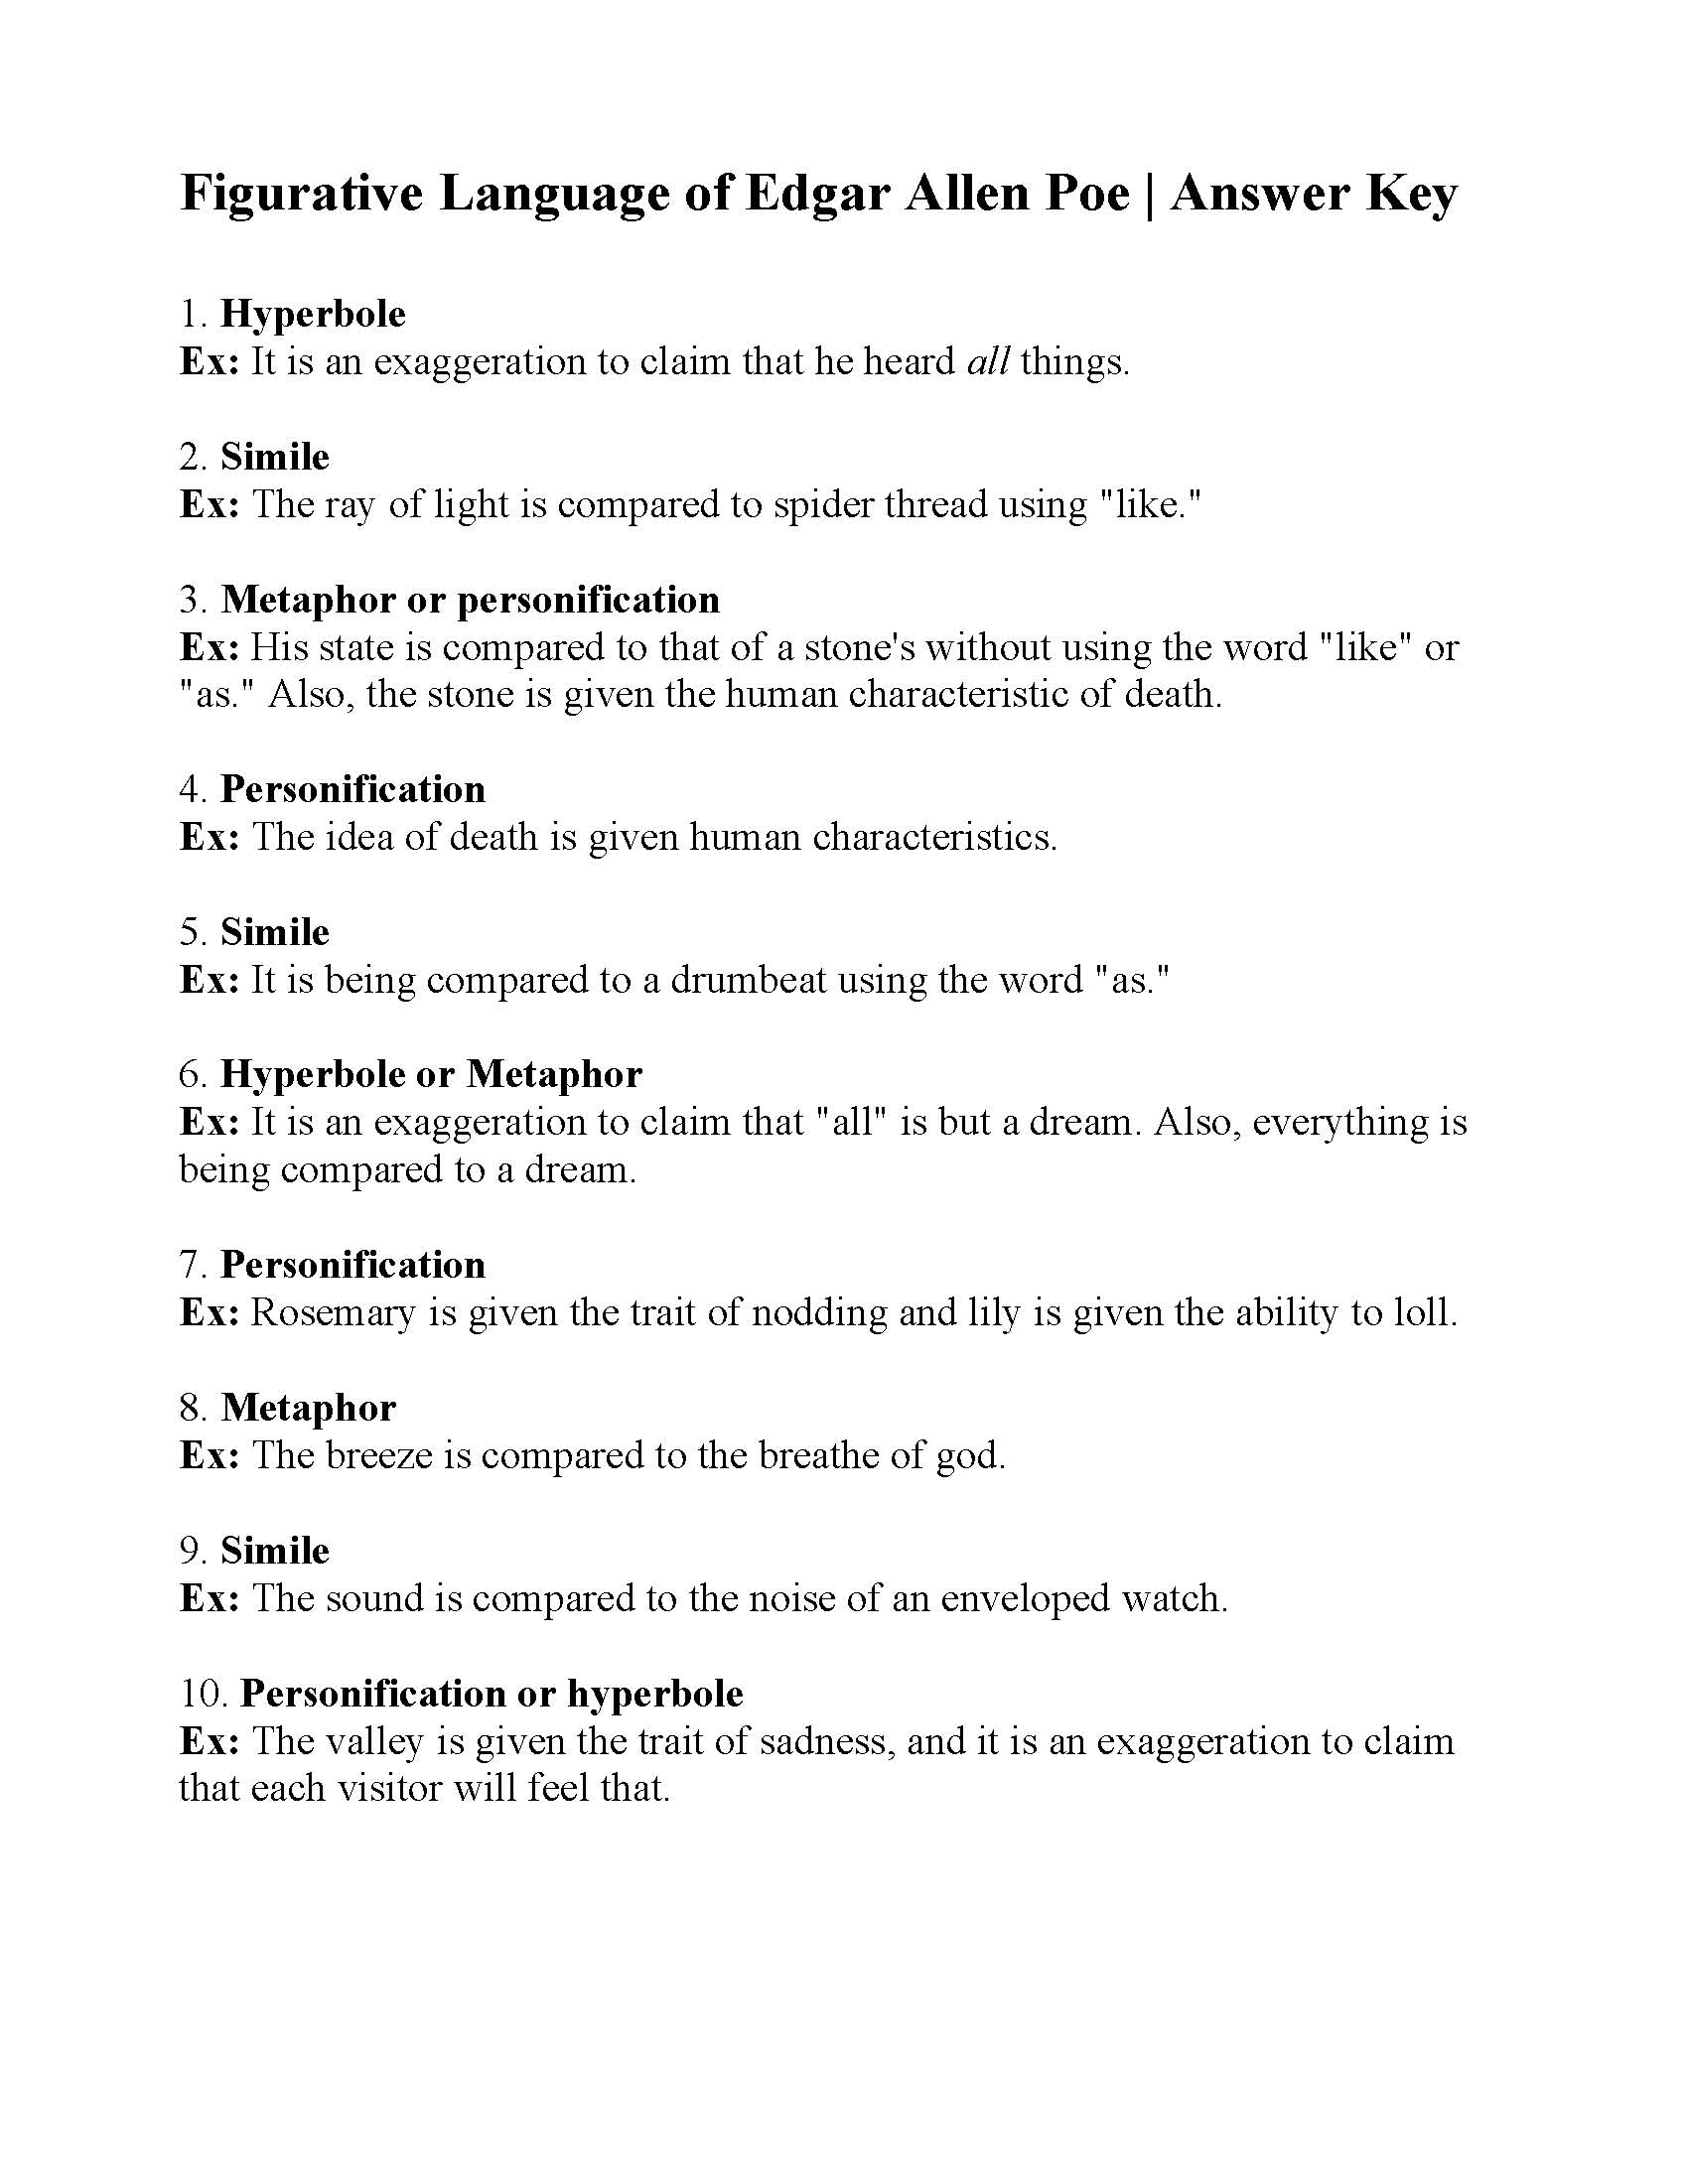 This is a preview image of Figurative Language of Edgar Allan Poe Worksheet. Click on it to enlarge it or view the source file.